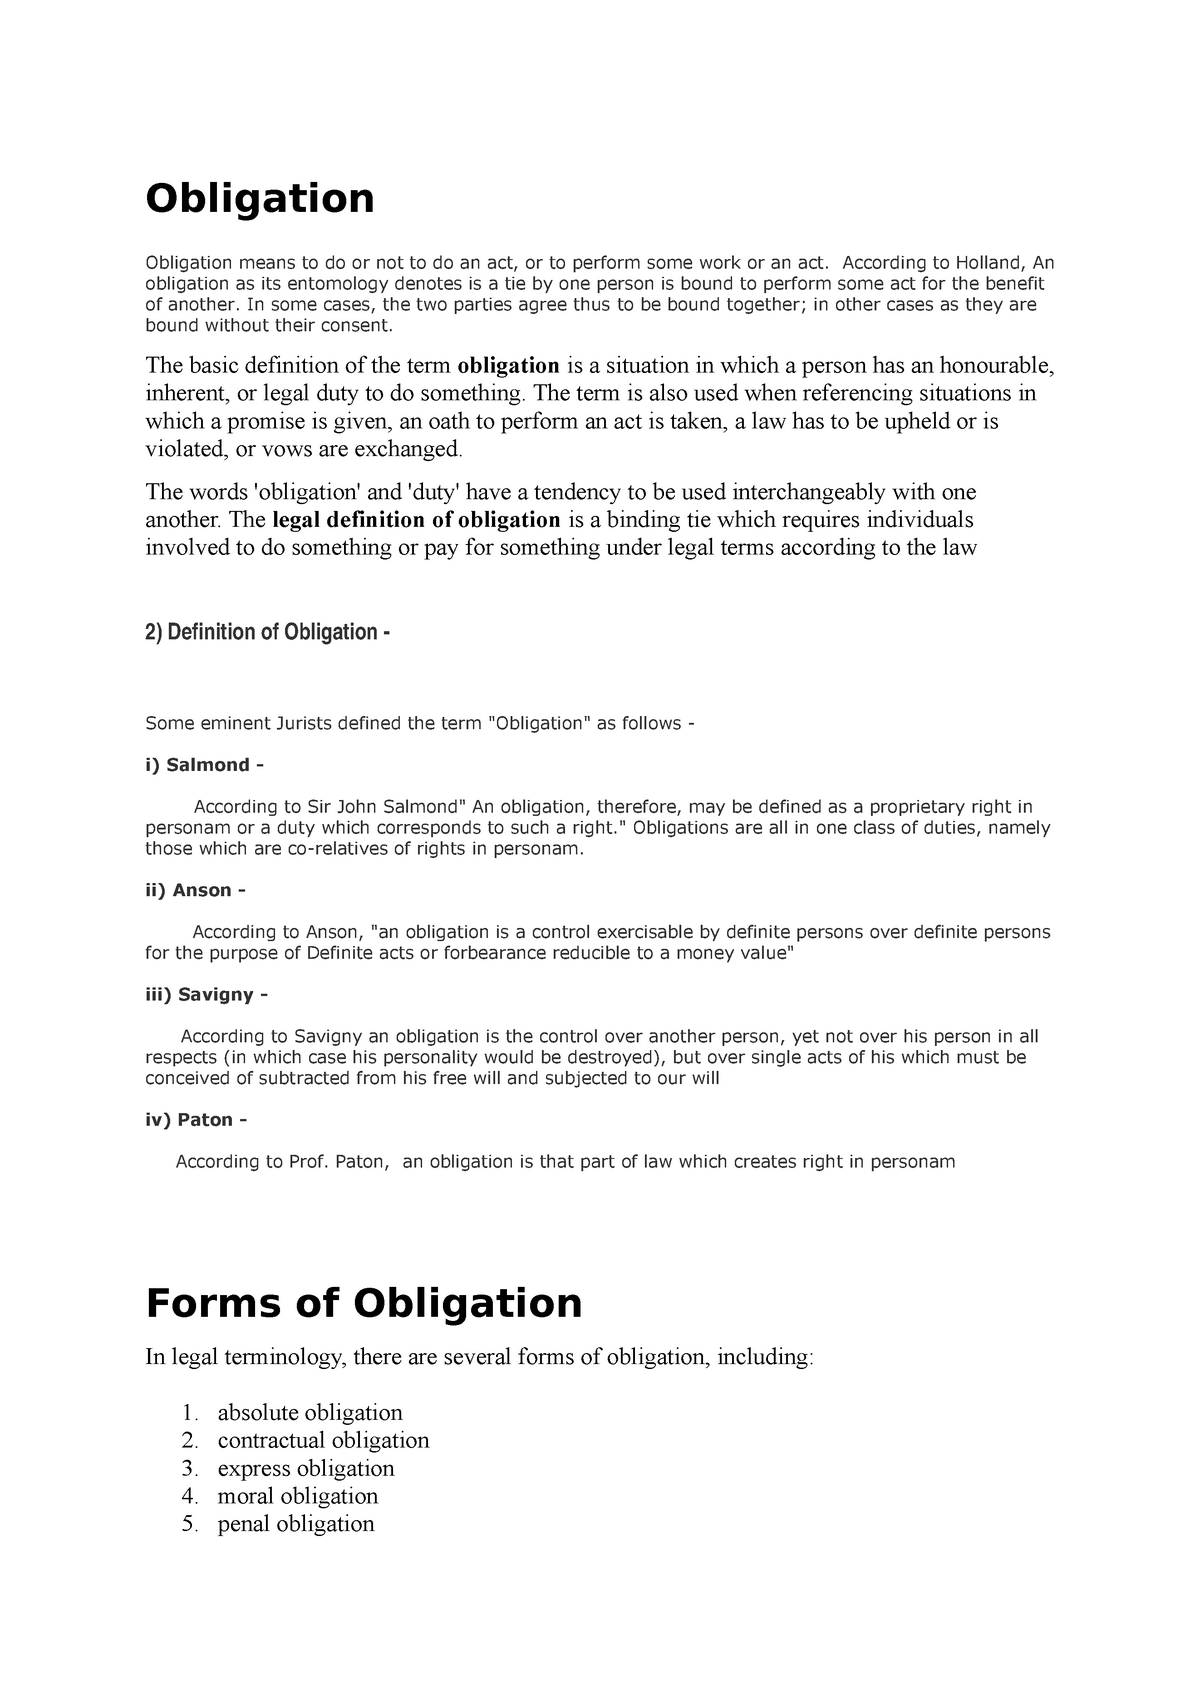 assignment of obligations